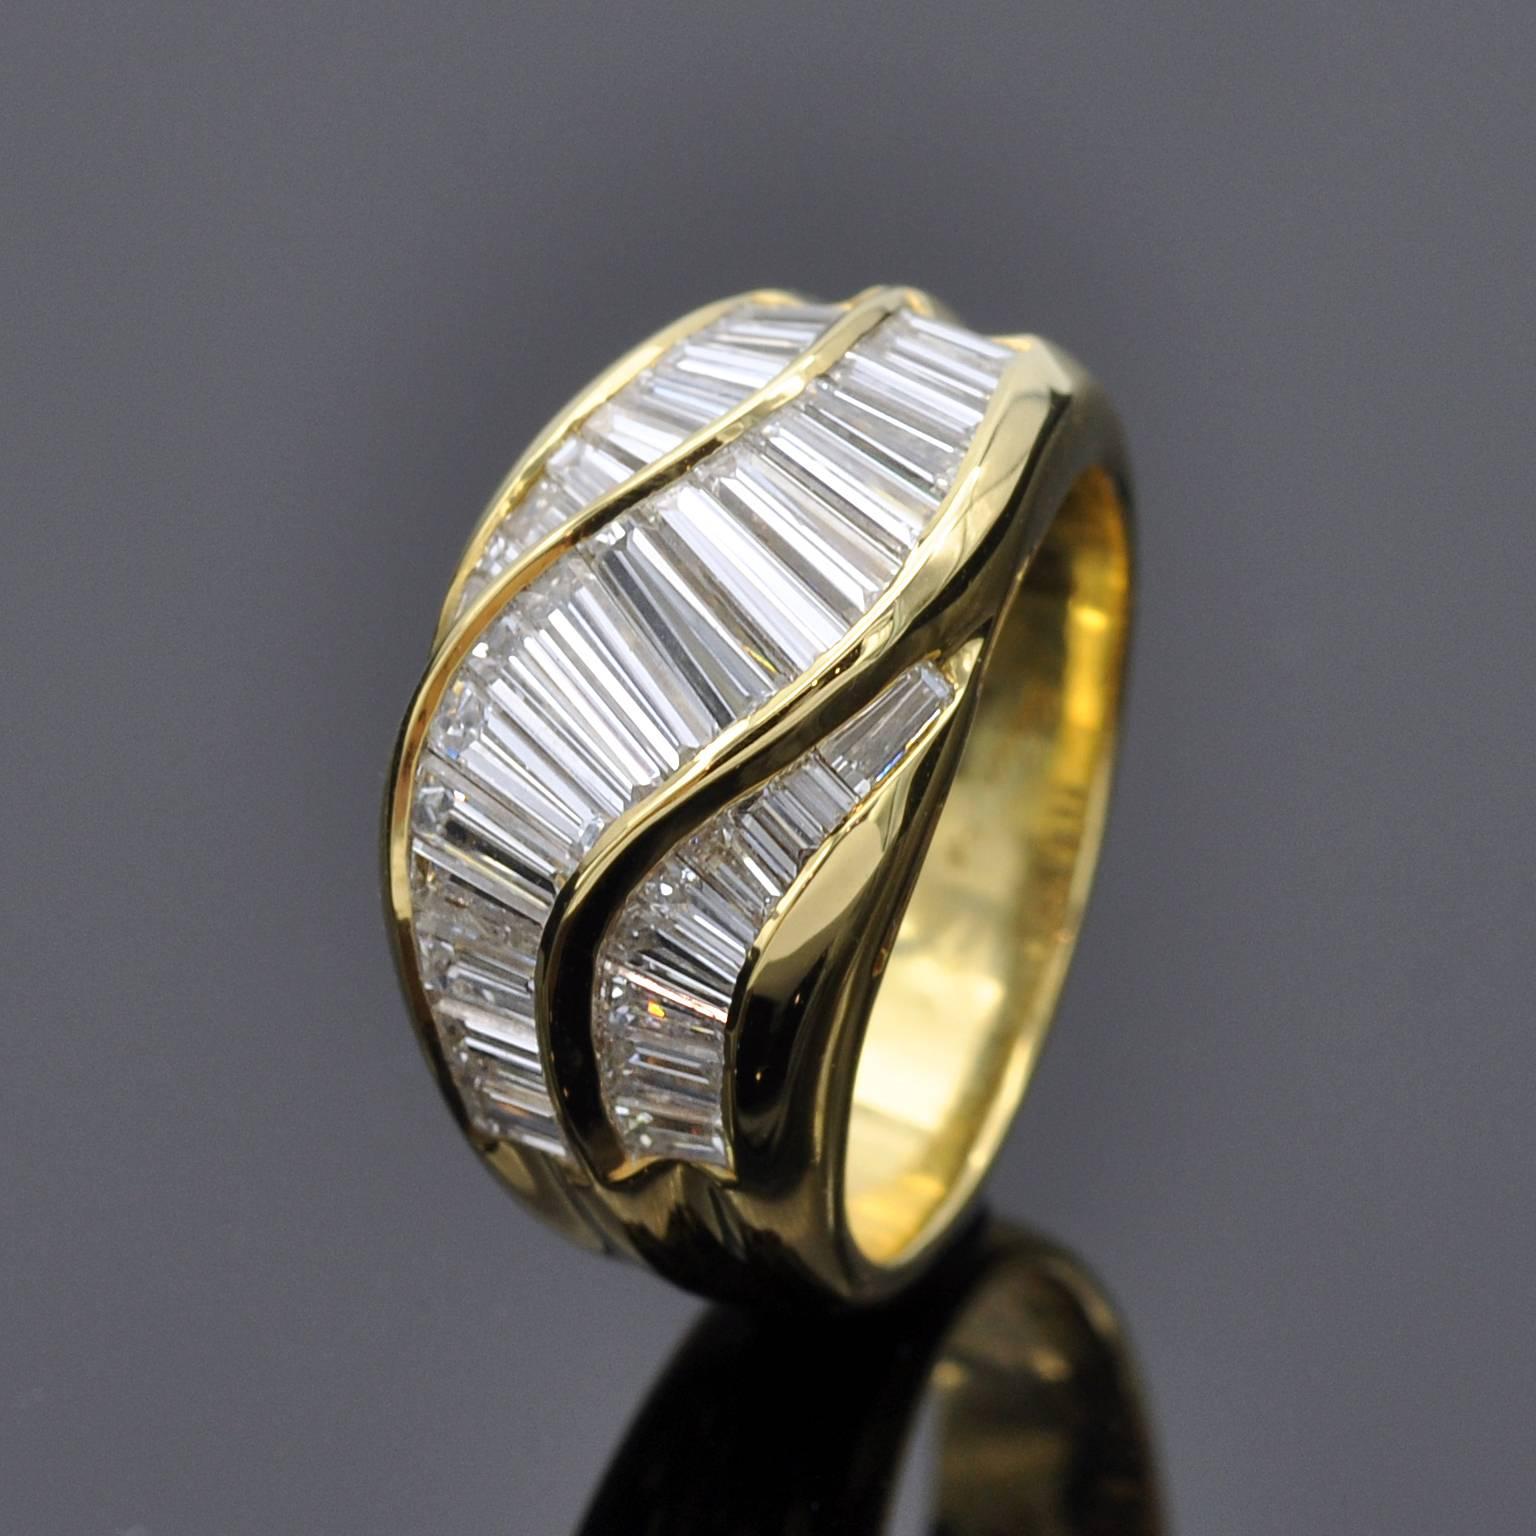  Exquisite band ring set with 2.95 carat of diamond baguette and tapered cut forming a gracious curving movement.
The ring in 18 kt gold is very well made